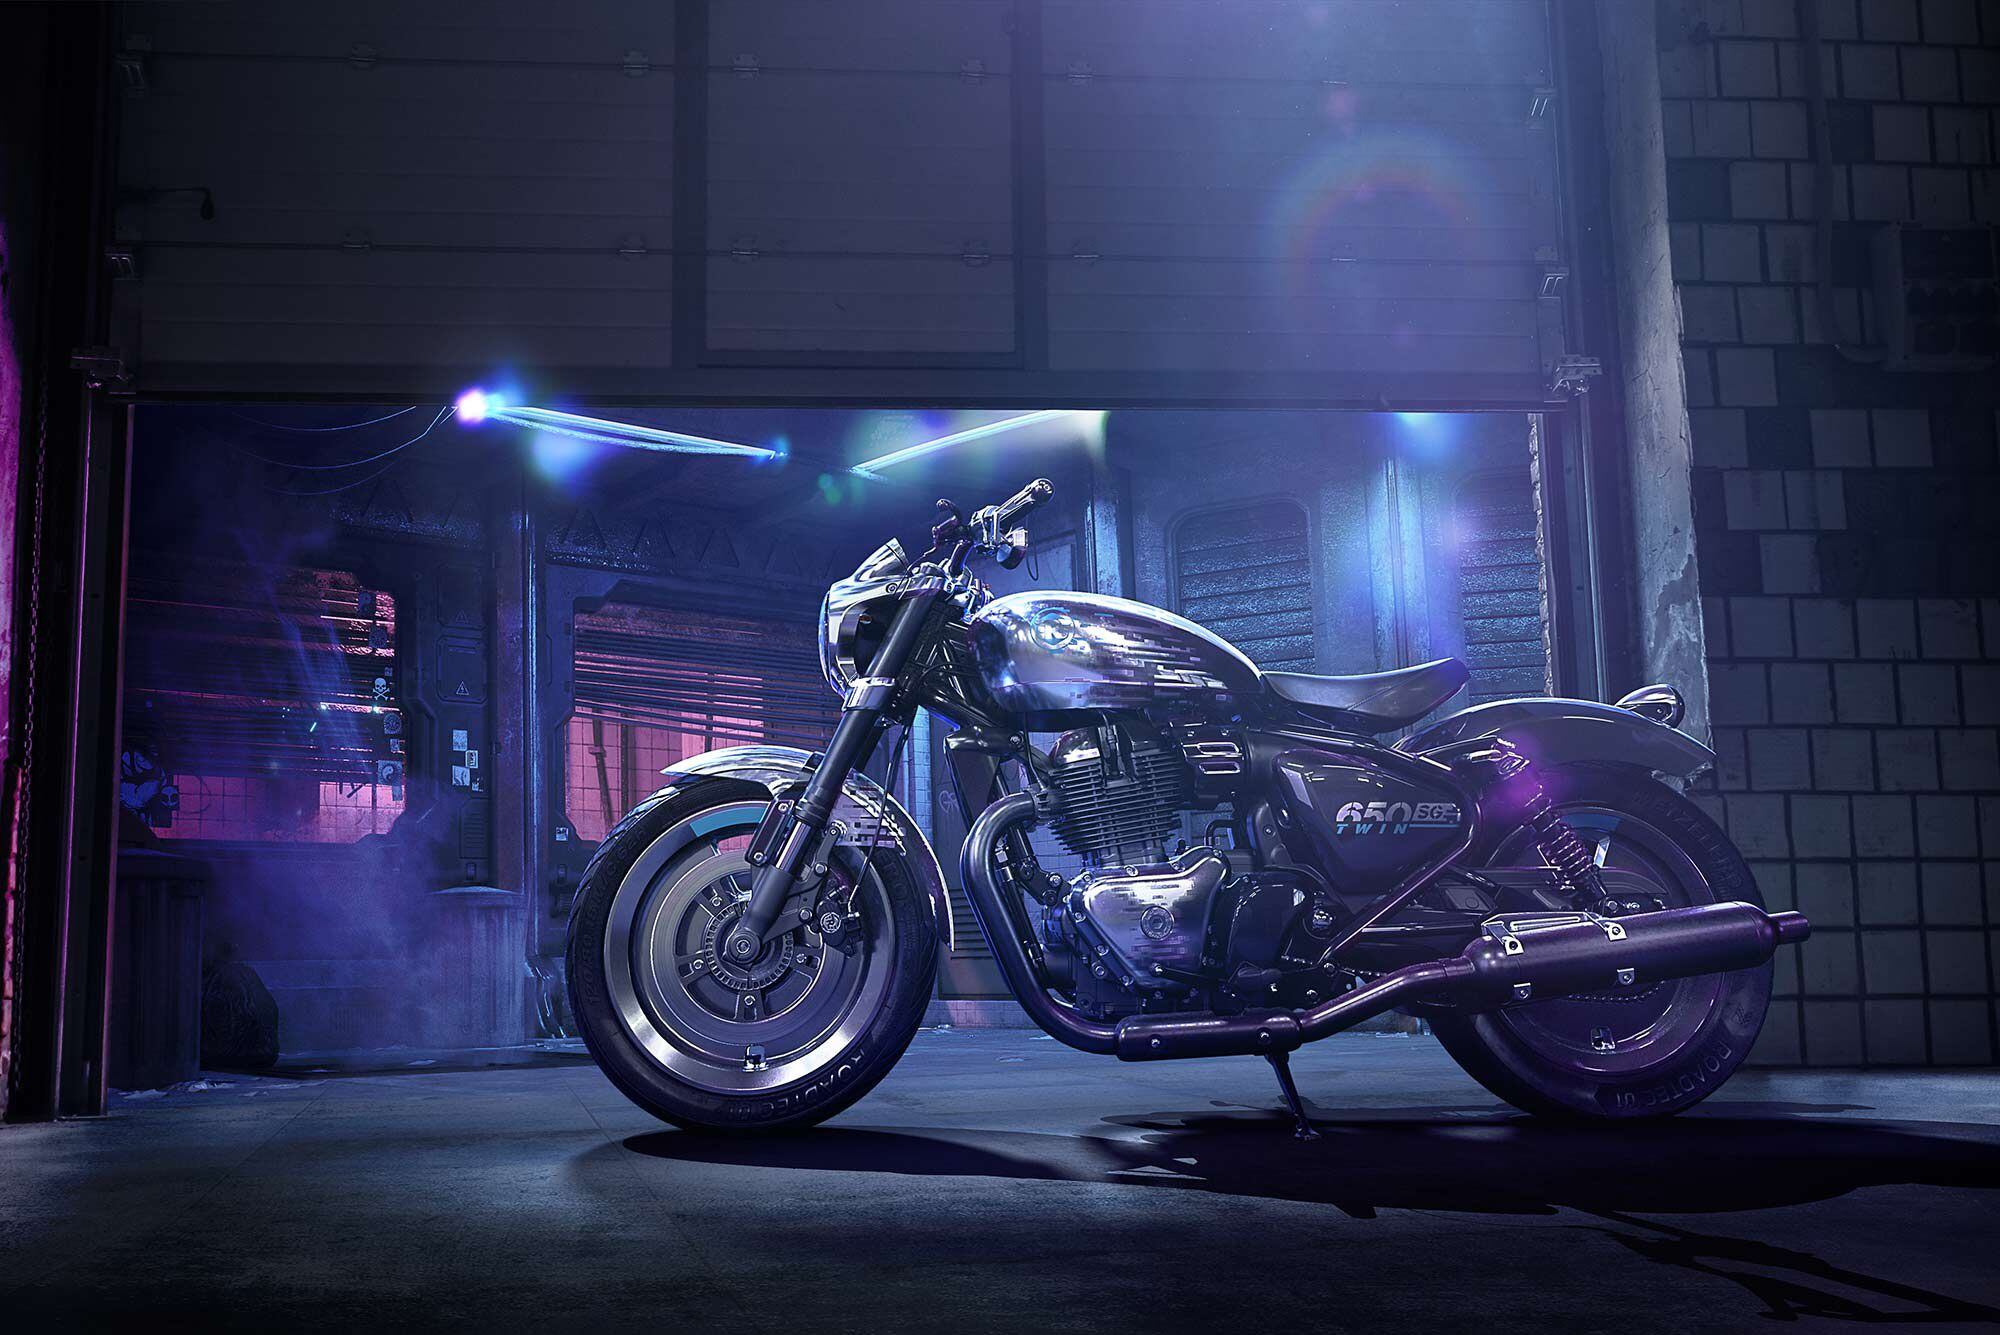 Royal Enfield’s SG650 concept will inspire aspects of a new bobber believed to be named Shotgun.